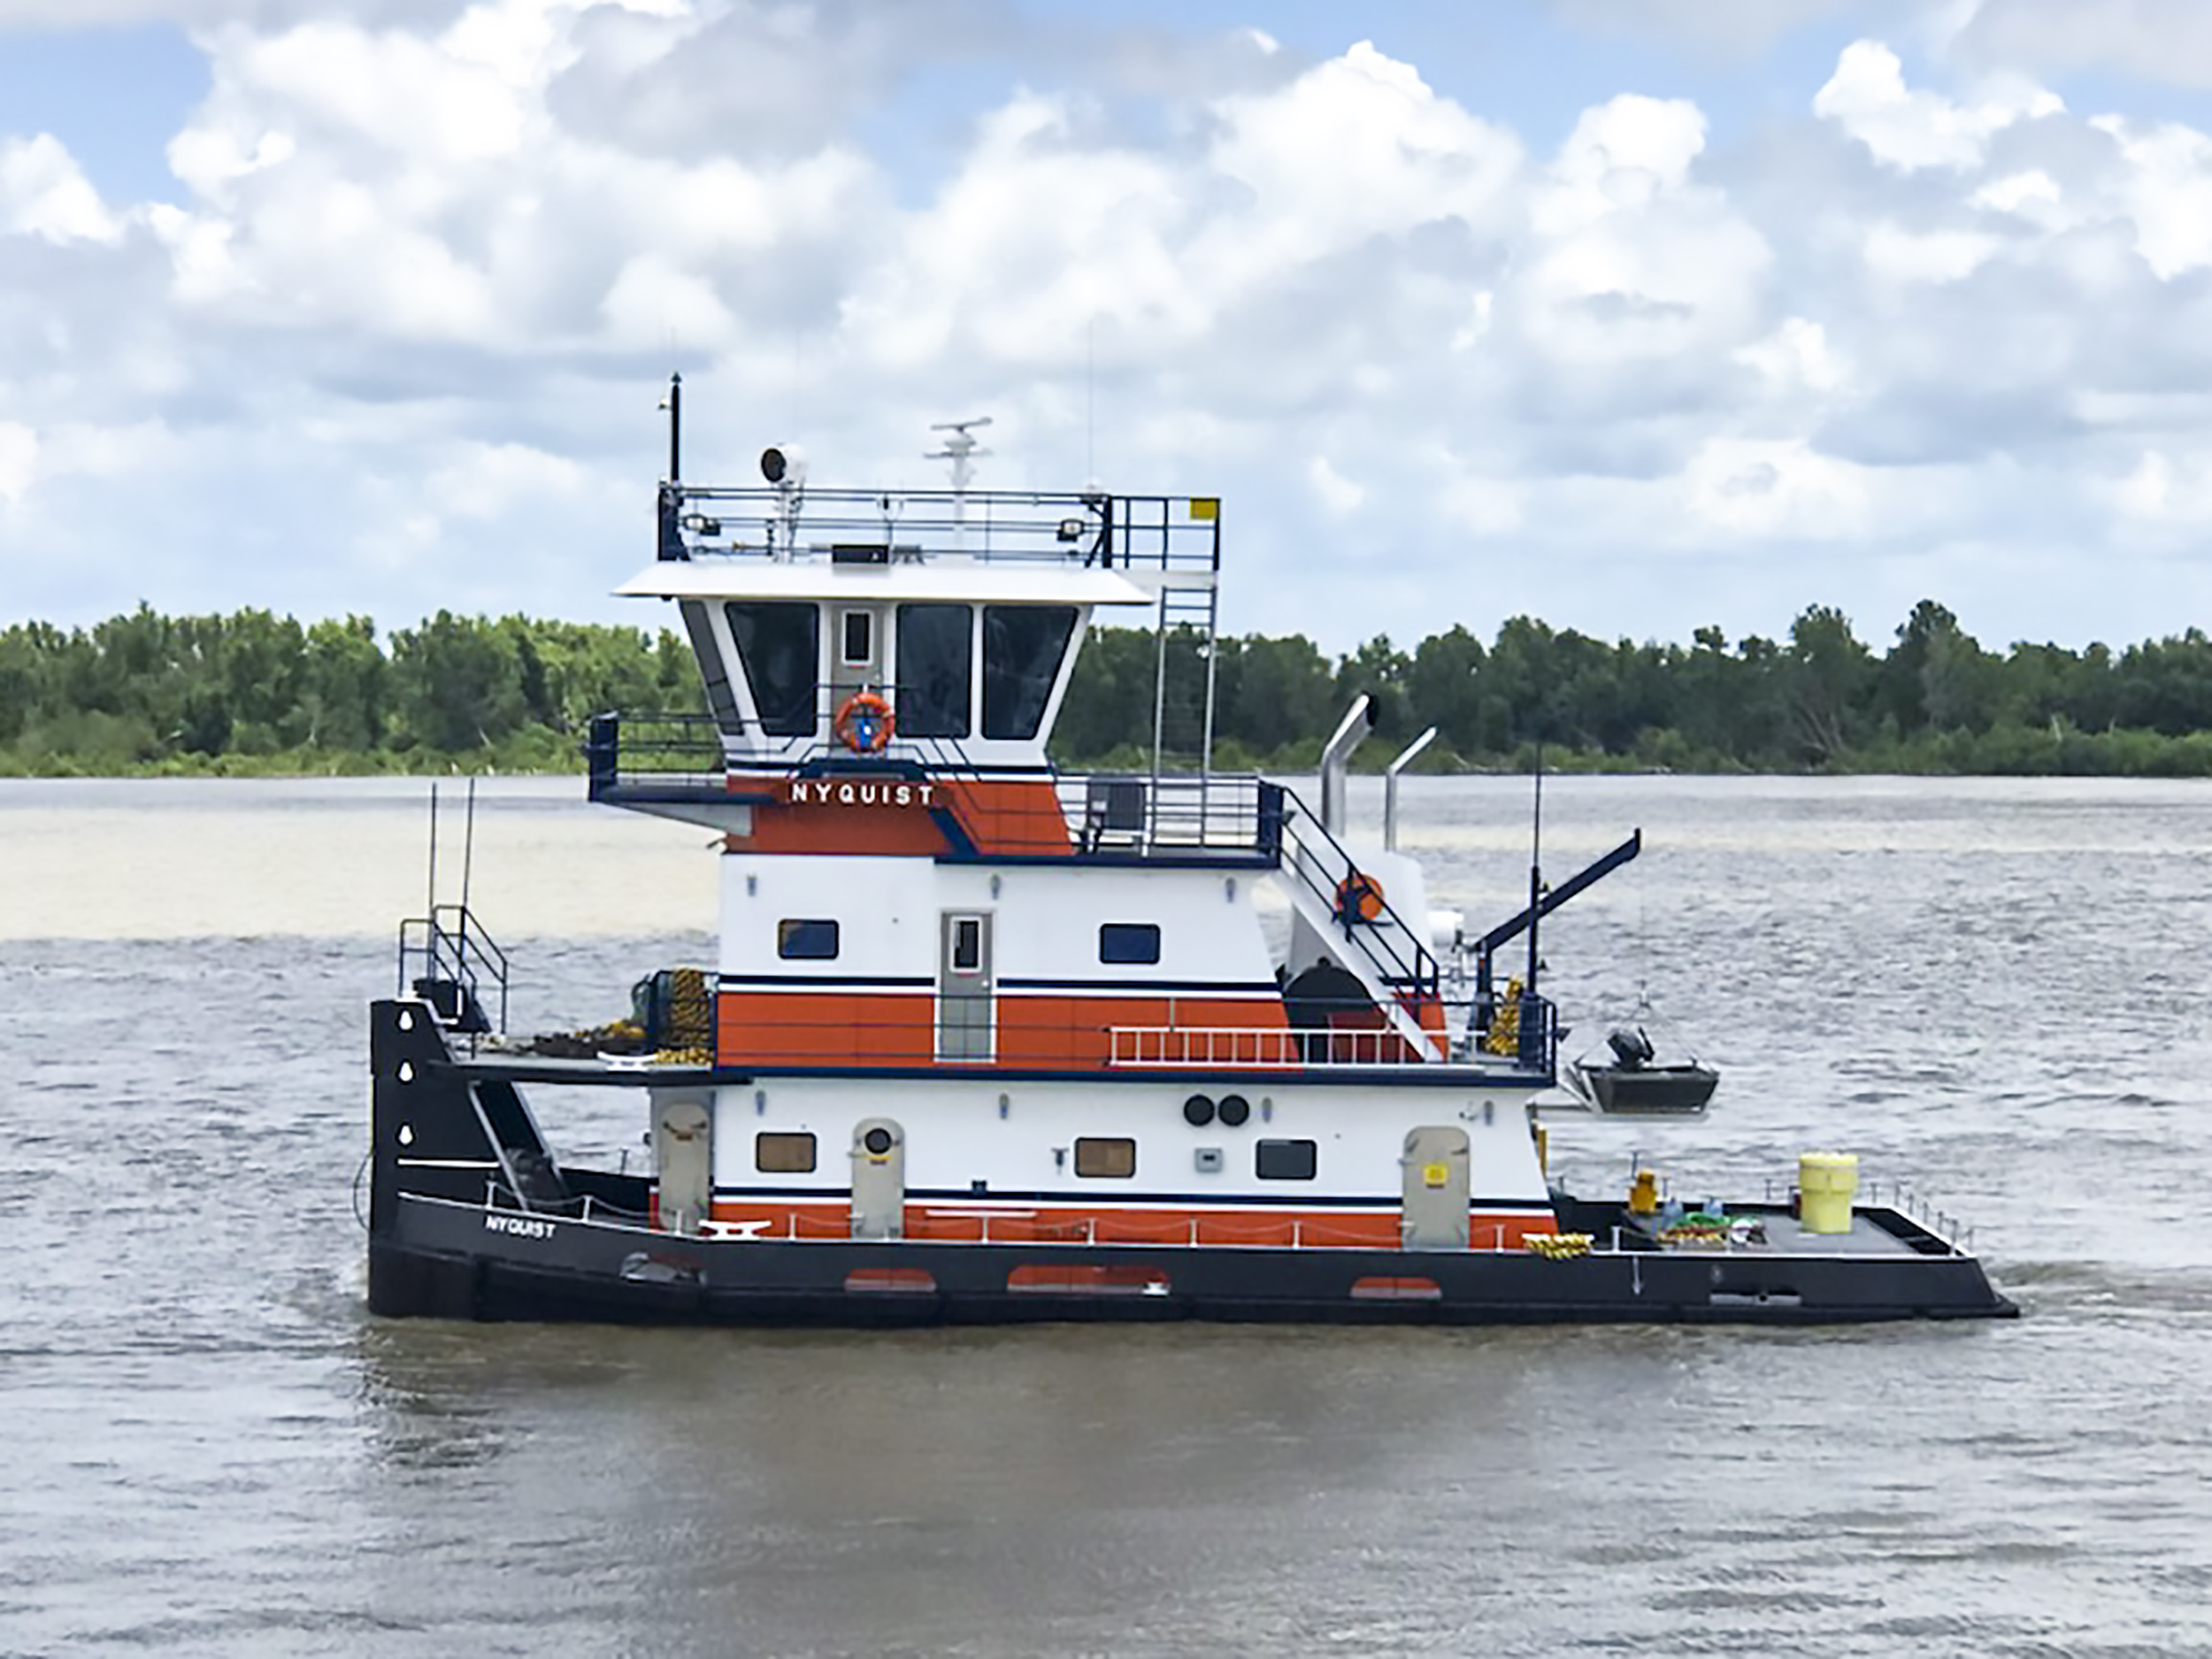 Pushboat "Nyquist" - Turn Services